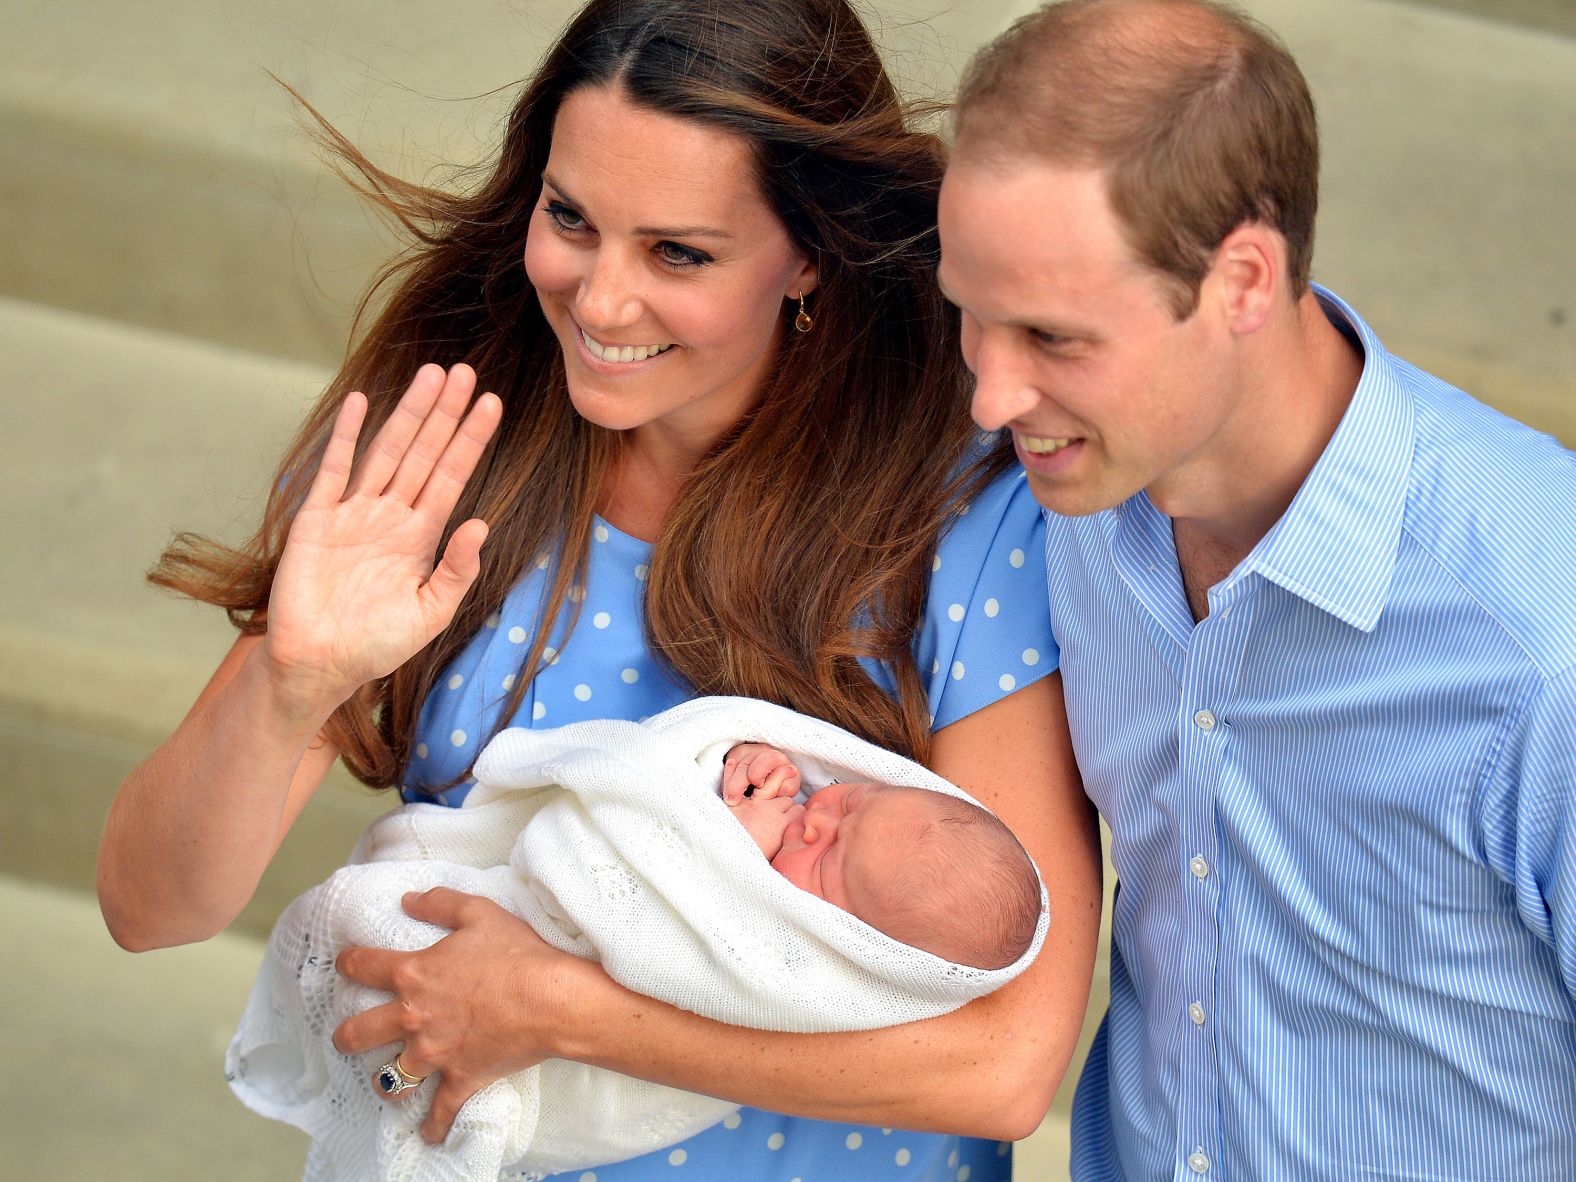 Kate and William depart St. Mary's Hospital in London in 2013 with their newborn son, Prince George.